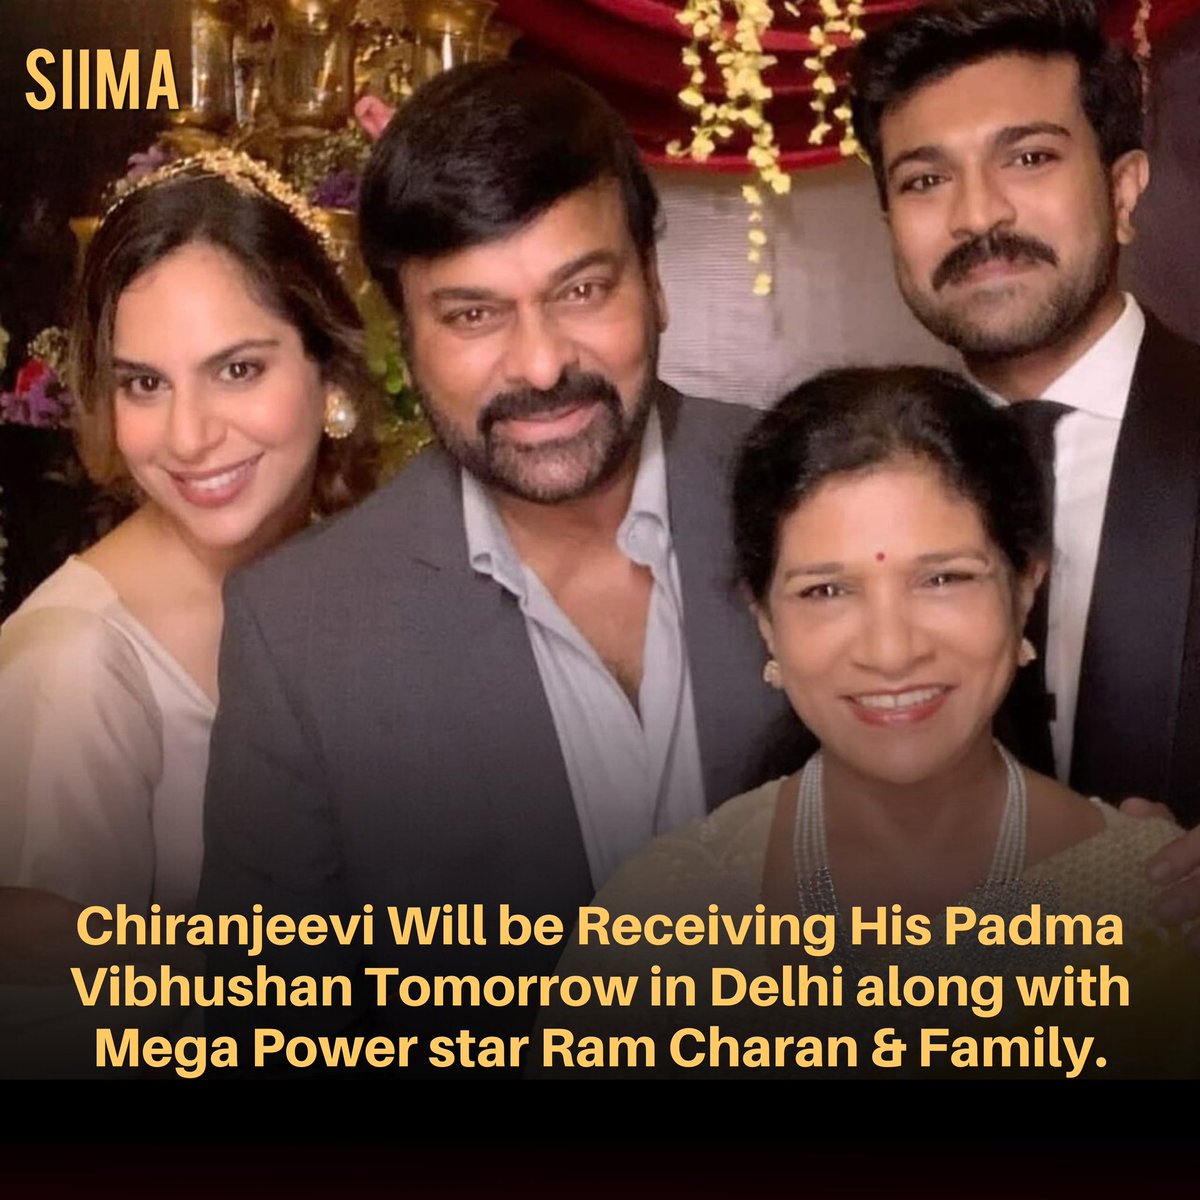 A momentous occasion awaits! Chiranjeevi will be receiving his Padma Vibhushan tomorrow in Delhi, joined by Mega Power star Ram Charan & Family. 🎖️✨ #Chiranjeevi #PadmaVibhushan #RamCharan #FamilyCelebration #SIIMA #RRR